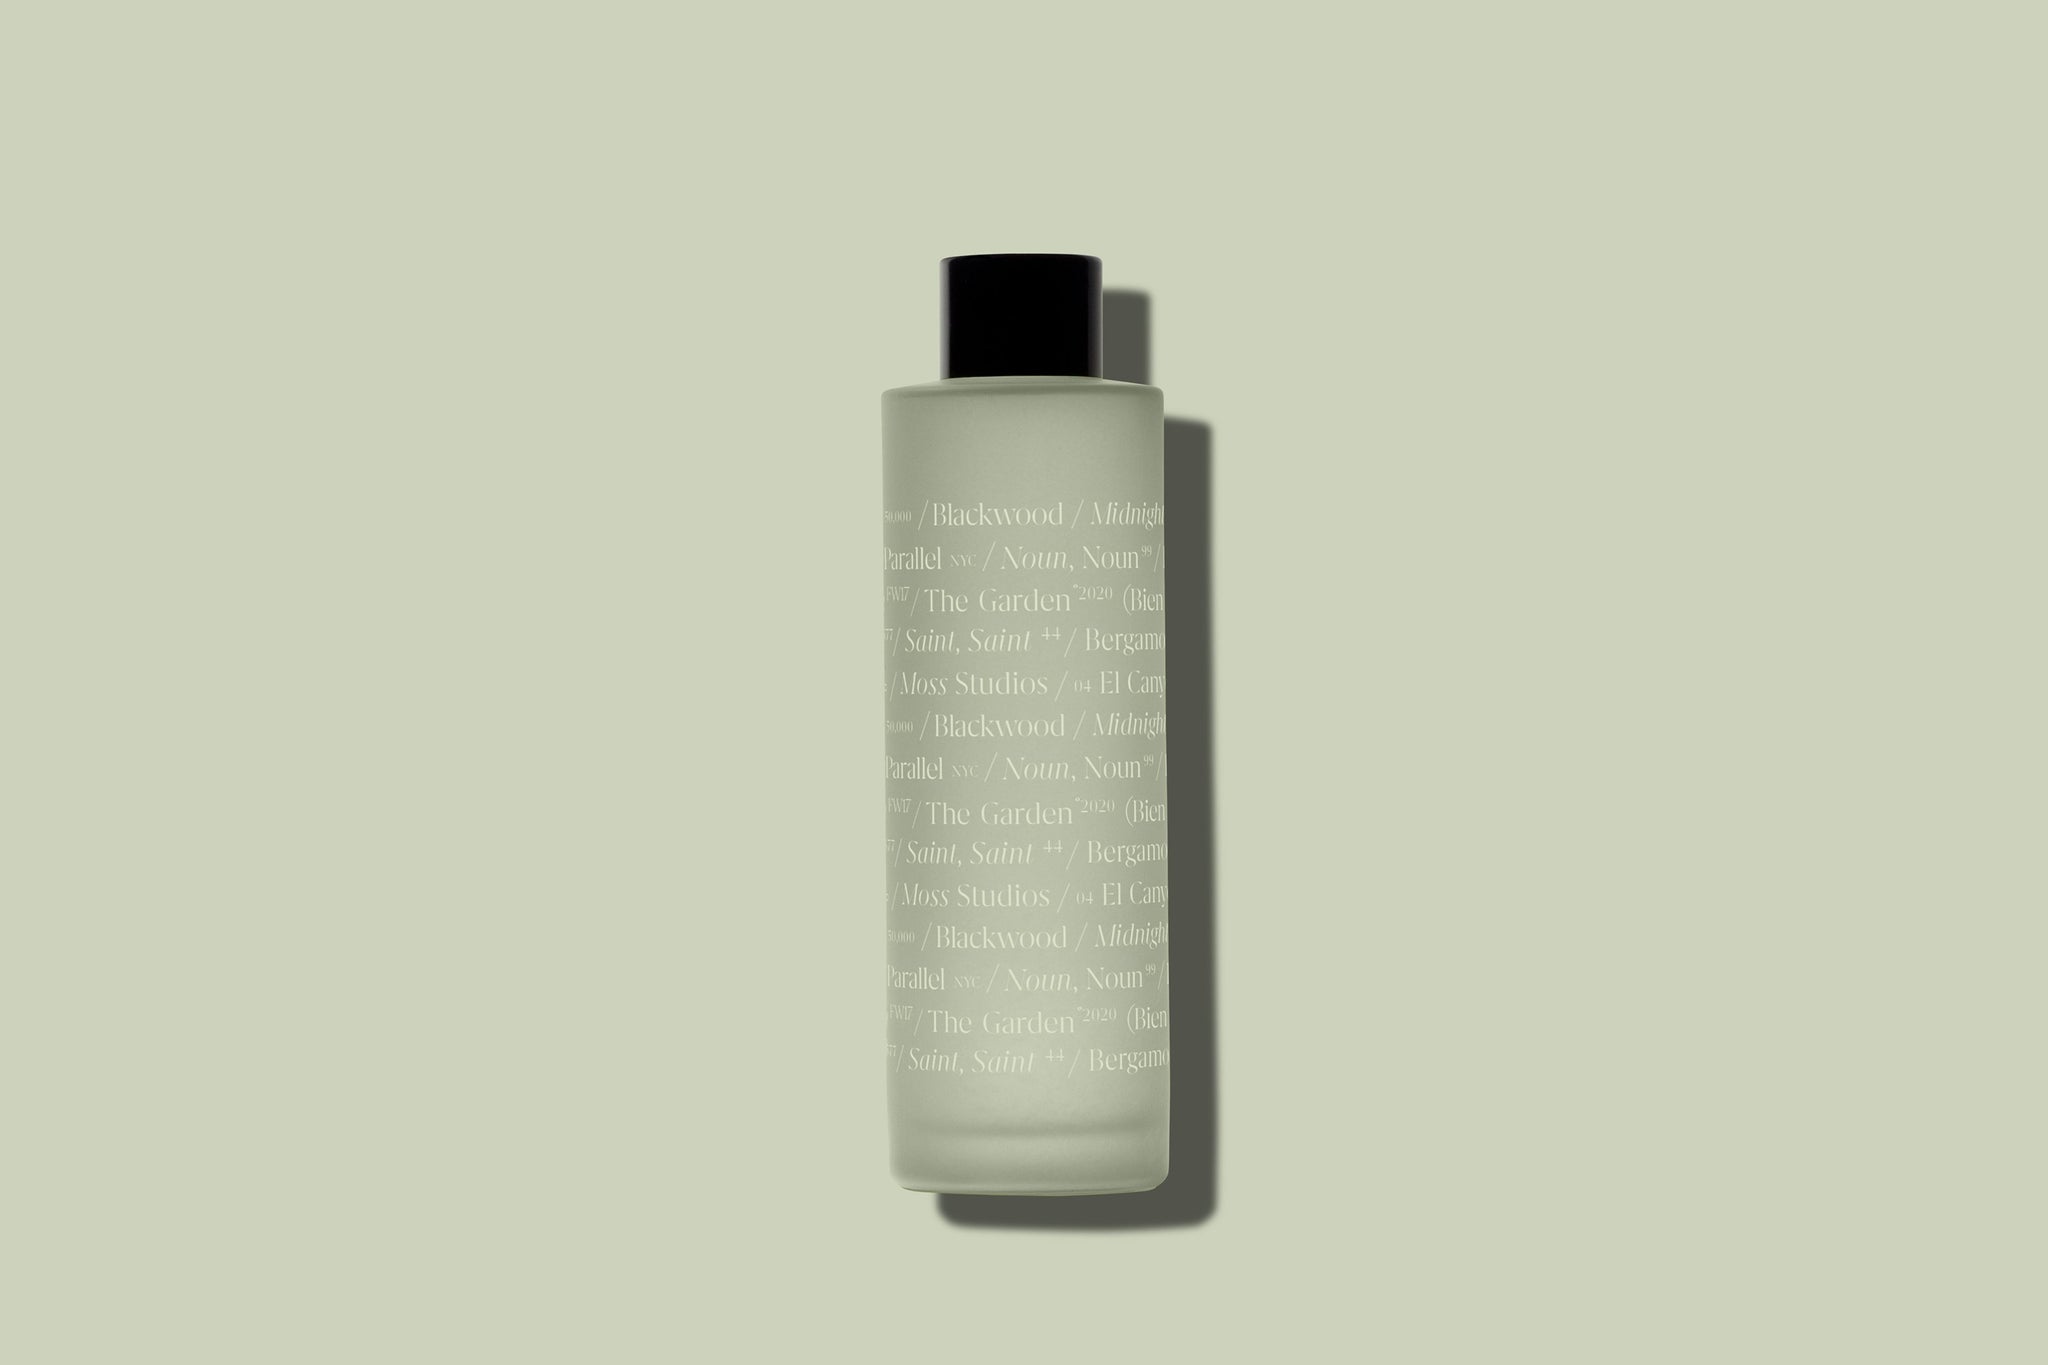 Frosted Glass Cosmetic Bottle Mockup - Copal Studio Packaging Mockups For Designers